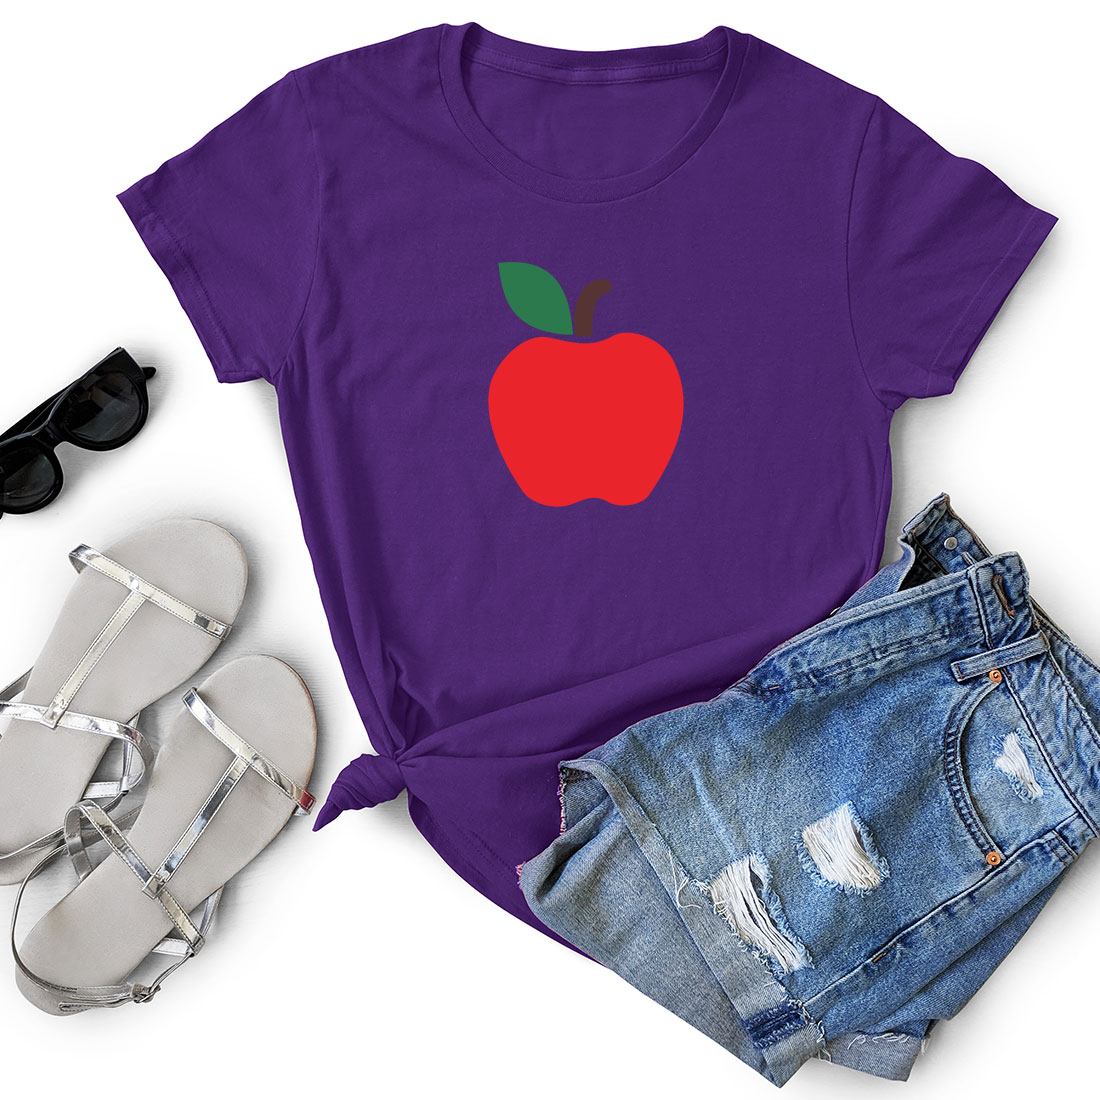 Purple shirt with a red apple on it.